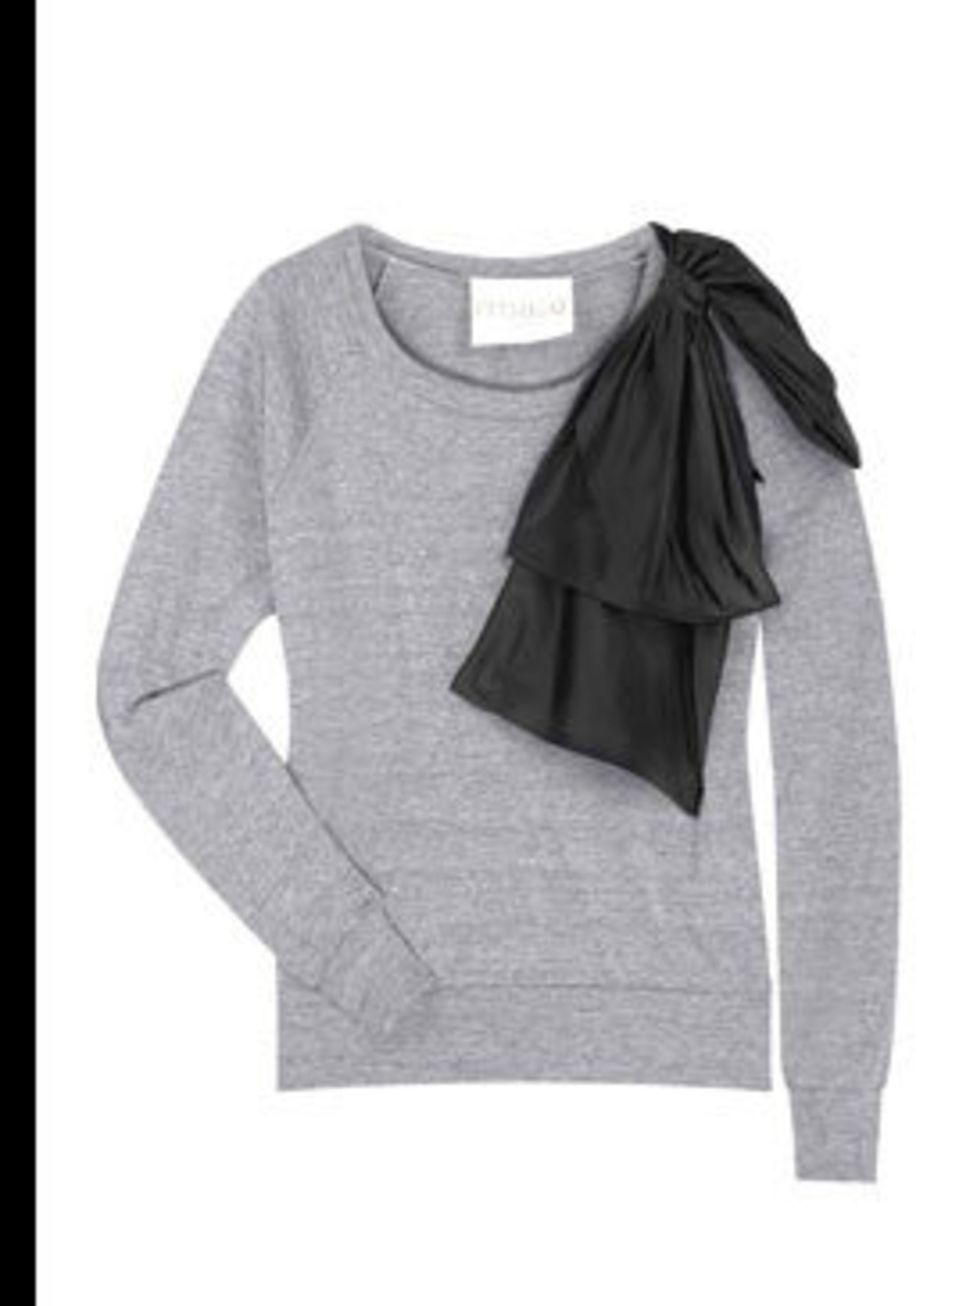 <p>Sweater, £140 by Thread Social at <a href="http://www.net-a-porter.com/product/45435">Net-a-Porter</a></p>